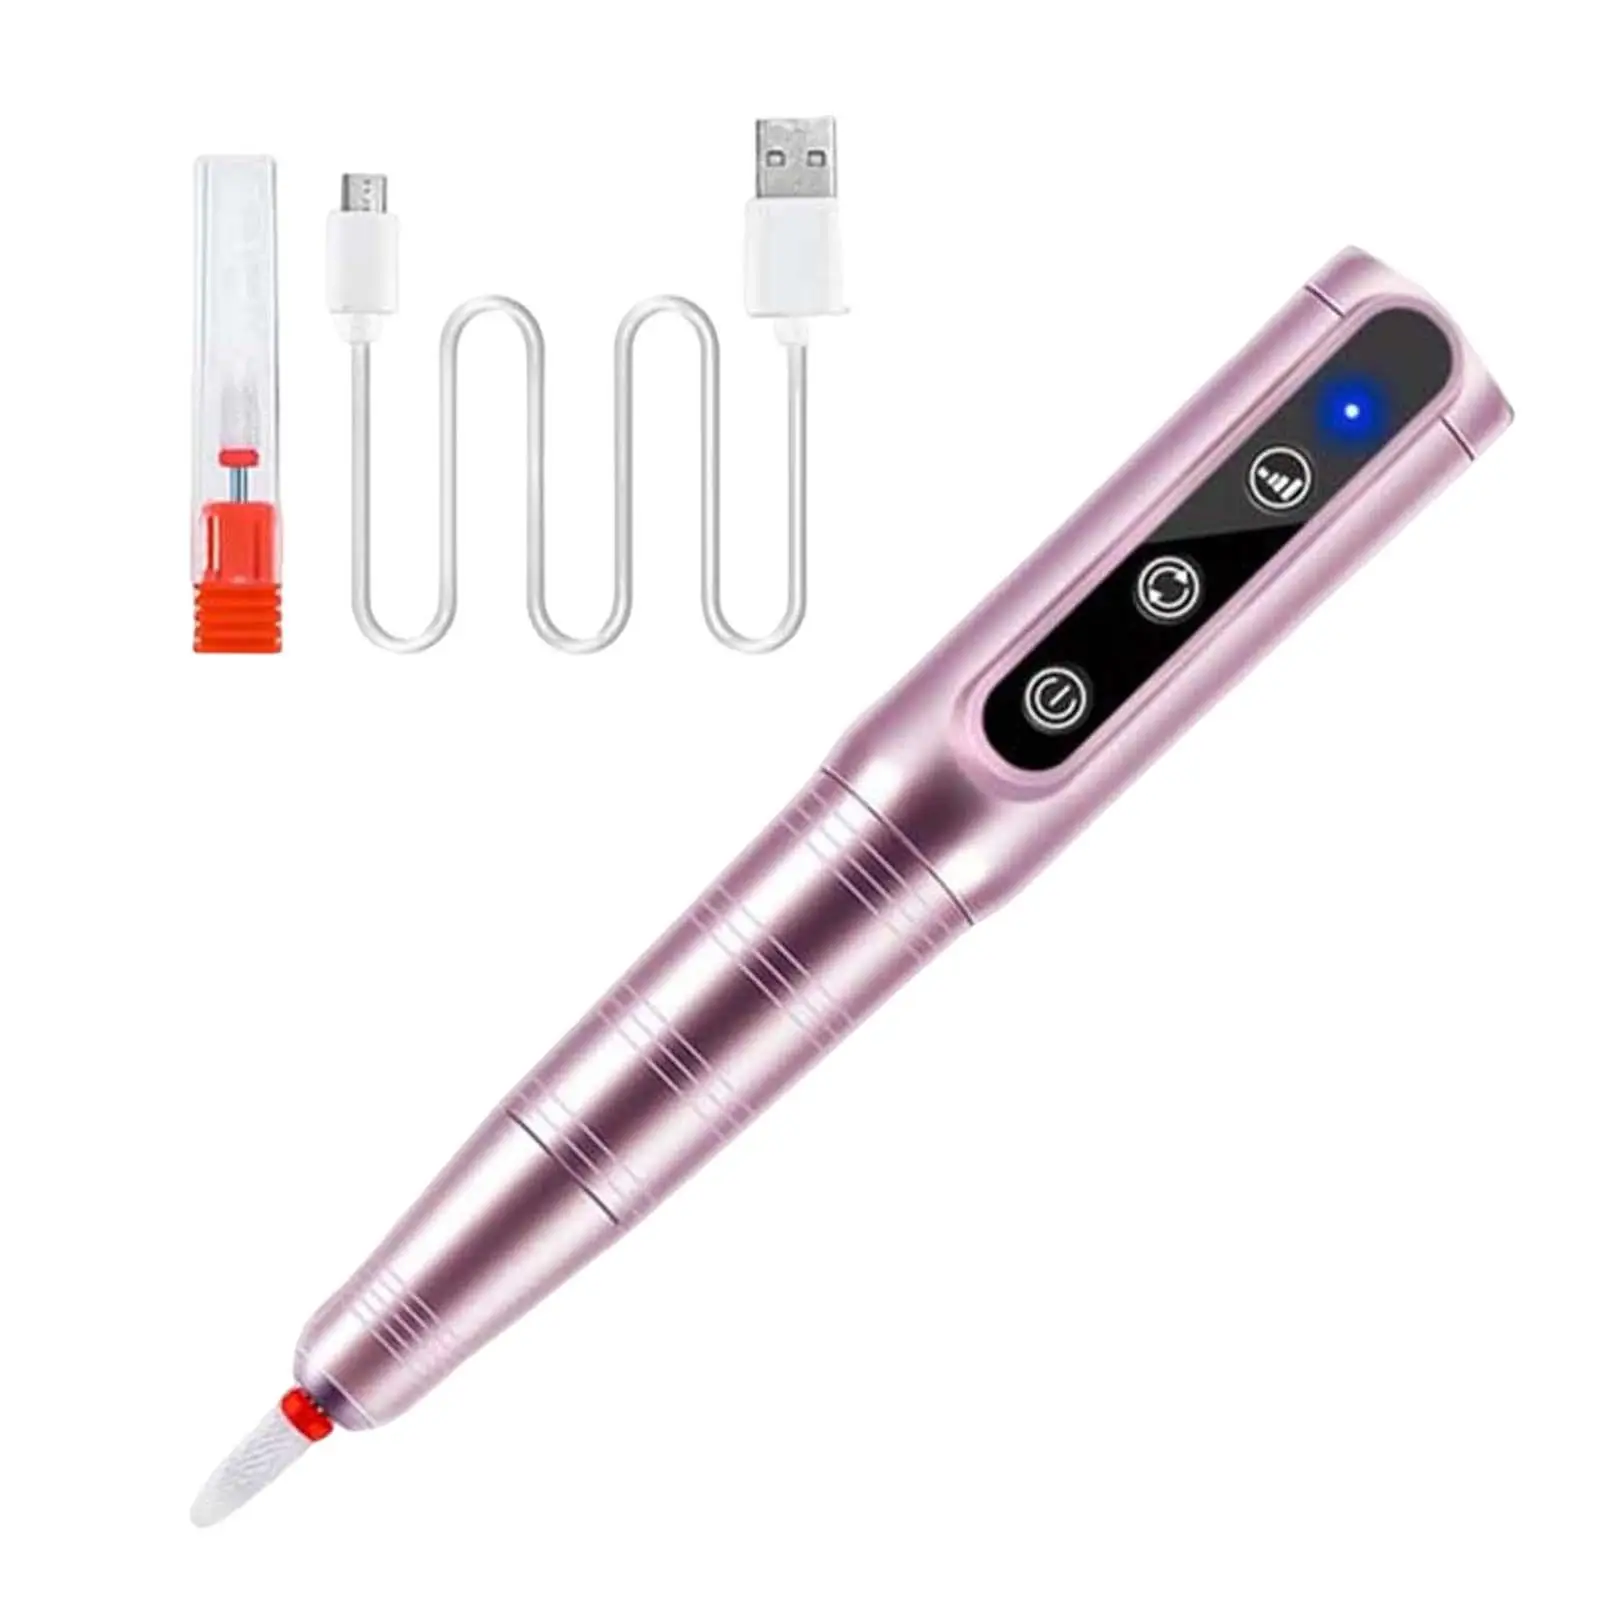 Professional Nail Filer Kit Nail Tools Rechargeable Cordless USB Electric Nail Drill Machine for Removing Acrylic Gel Nails